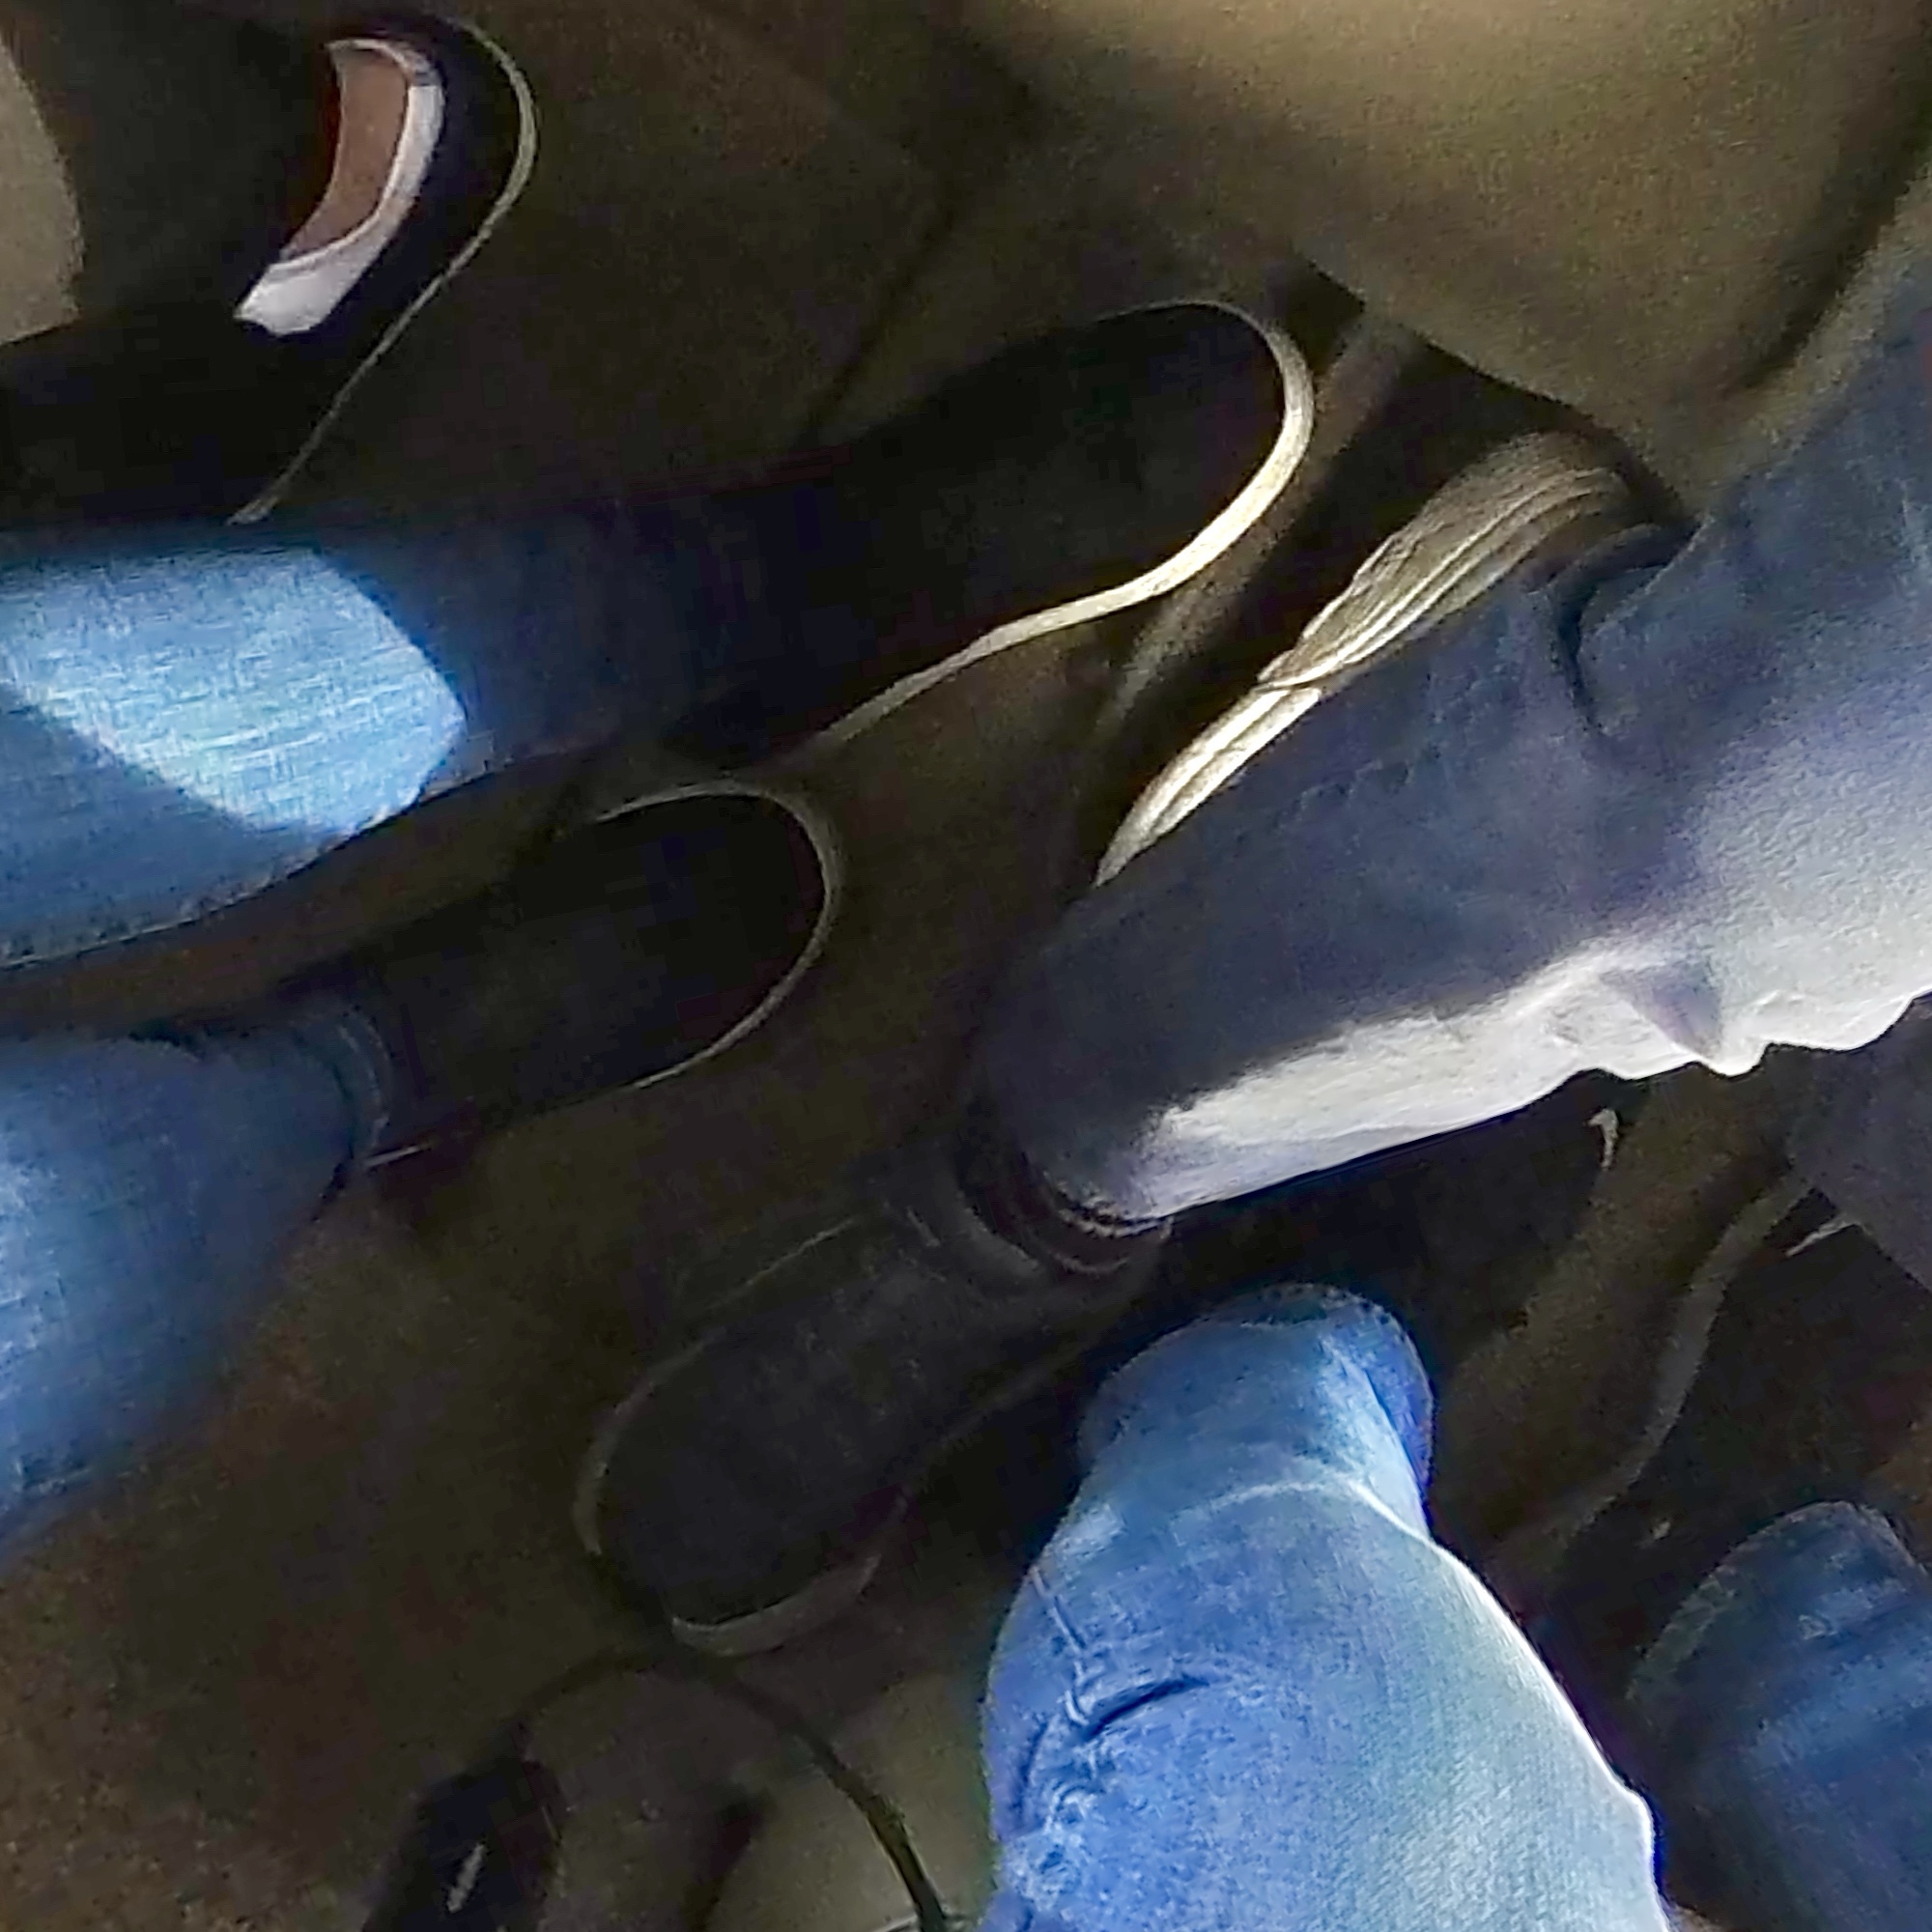 a group of people's legs in a car